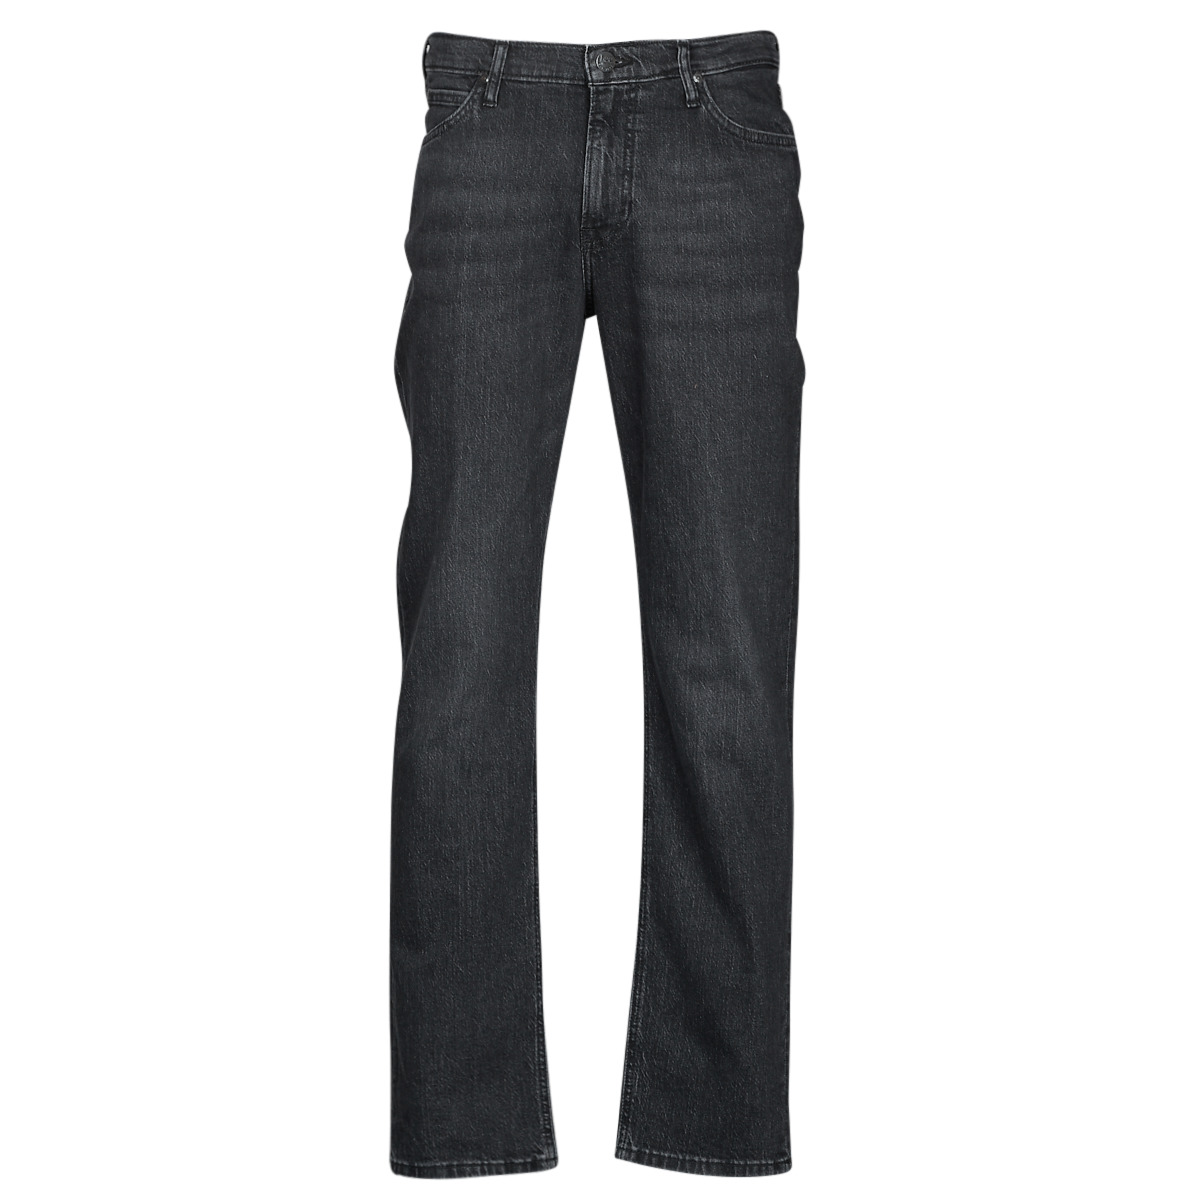 Lee WEST Rock - Free delivery | Spartoo NET ! - Clothing straight jeans Men